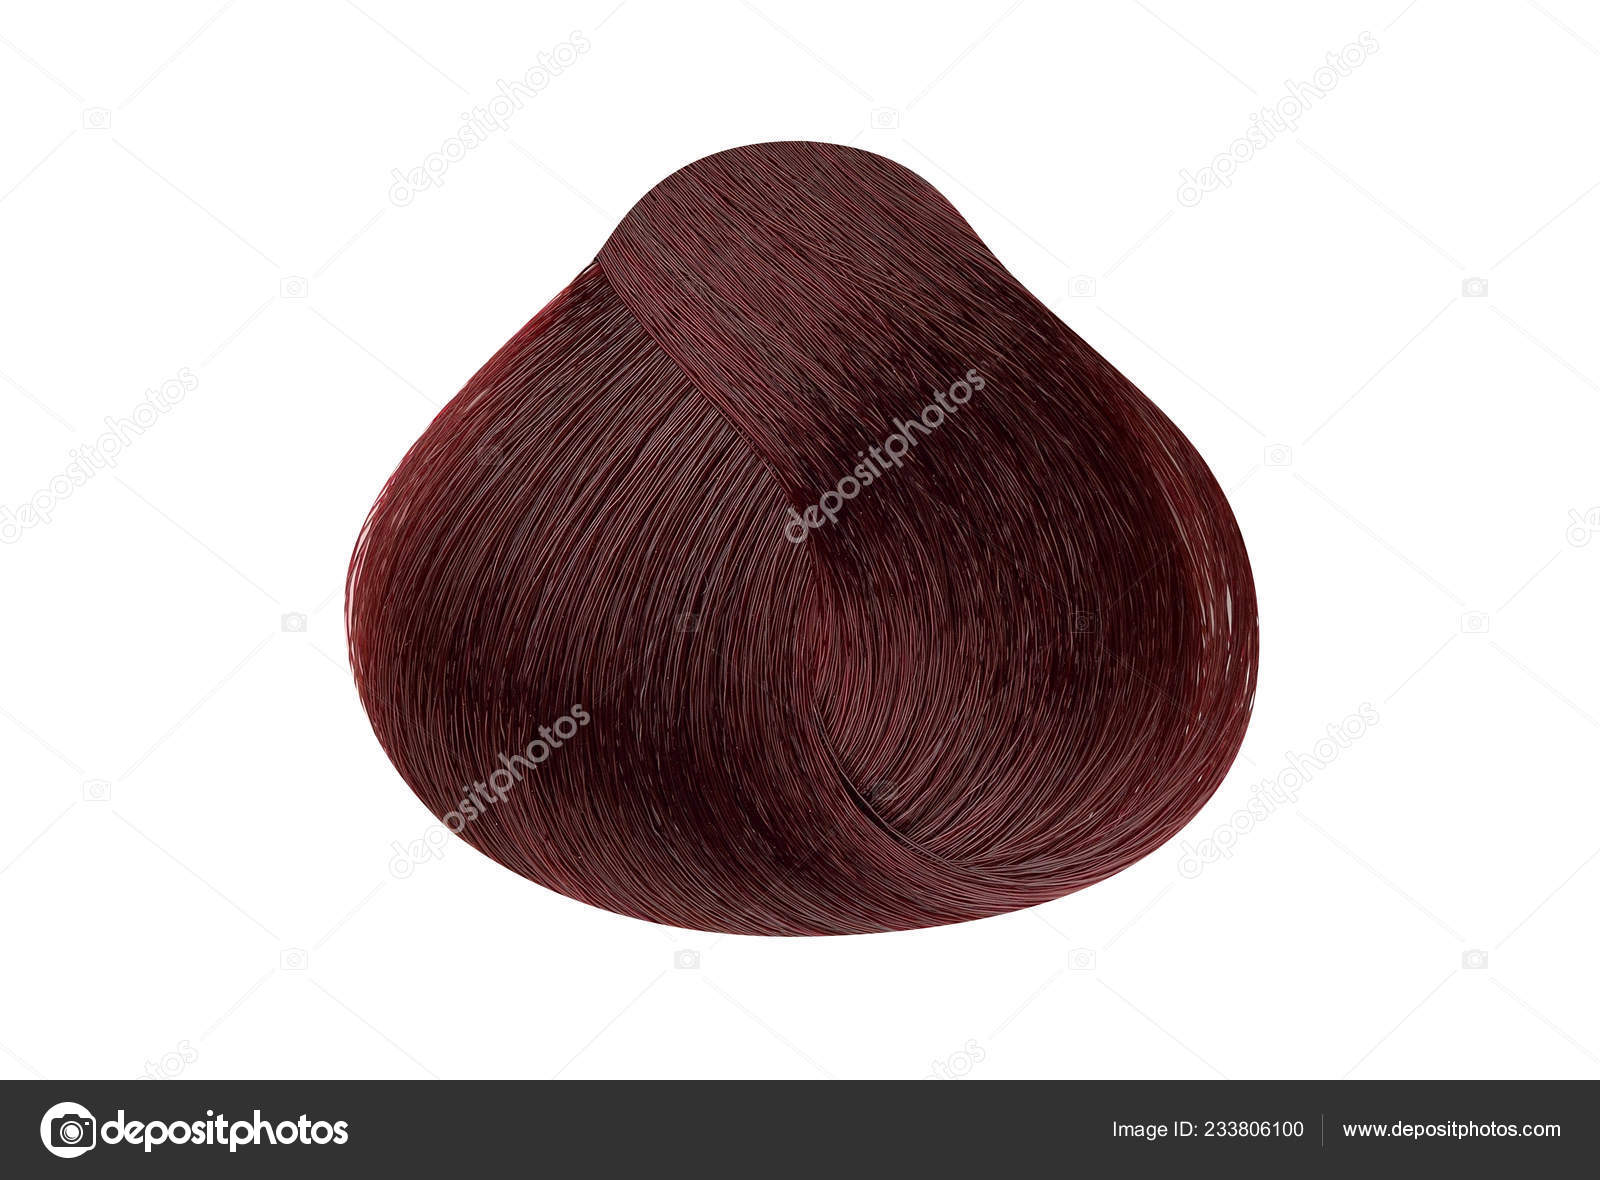 Lock Mahogany Coral Red Hair Color Sample Rounded Shape